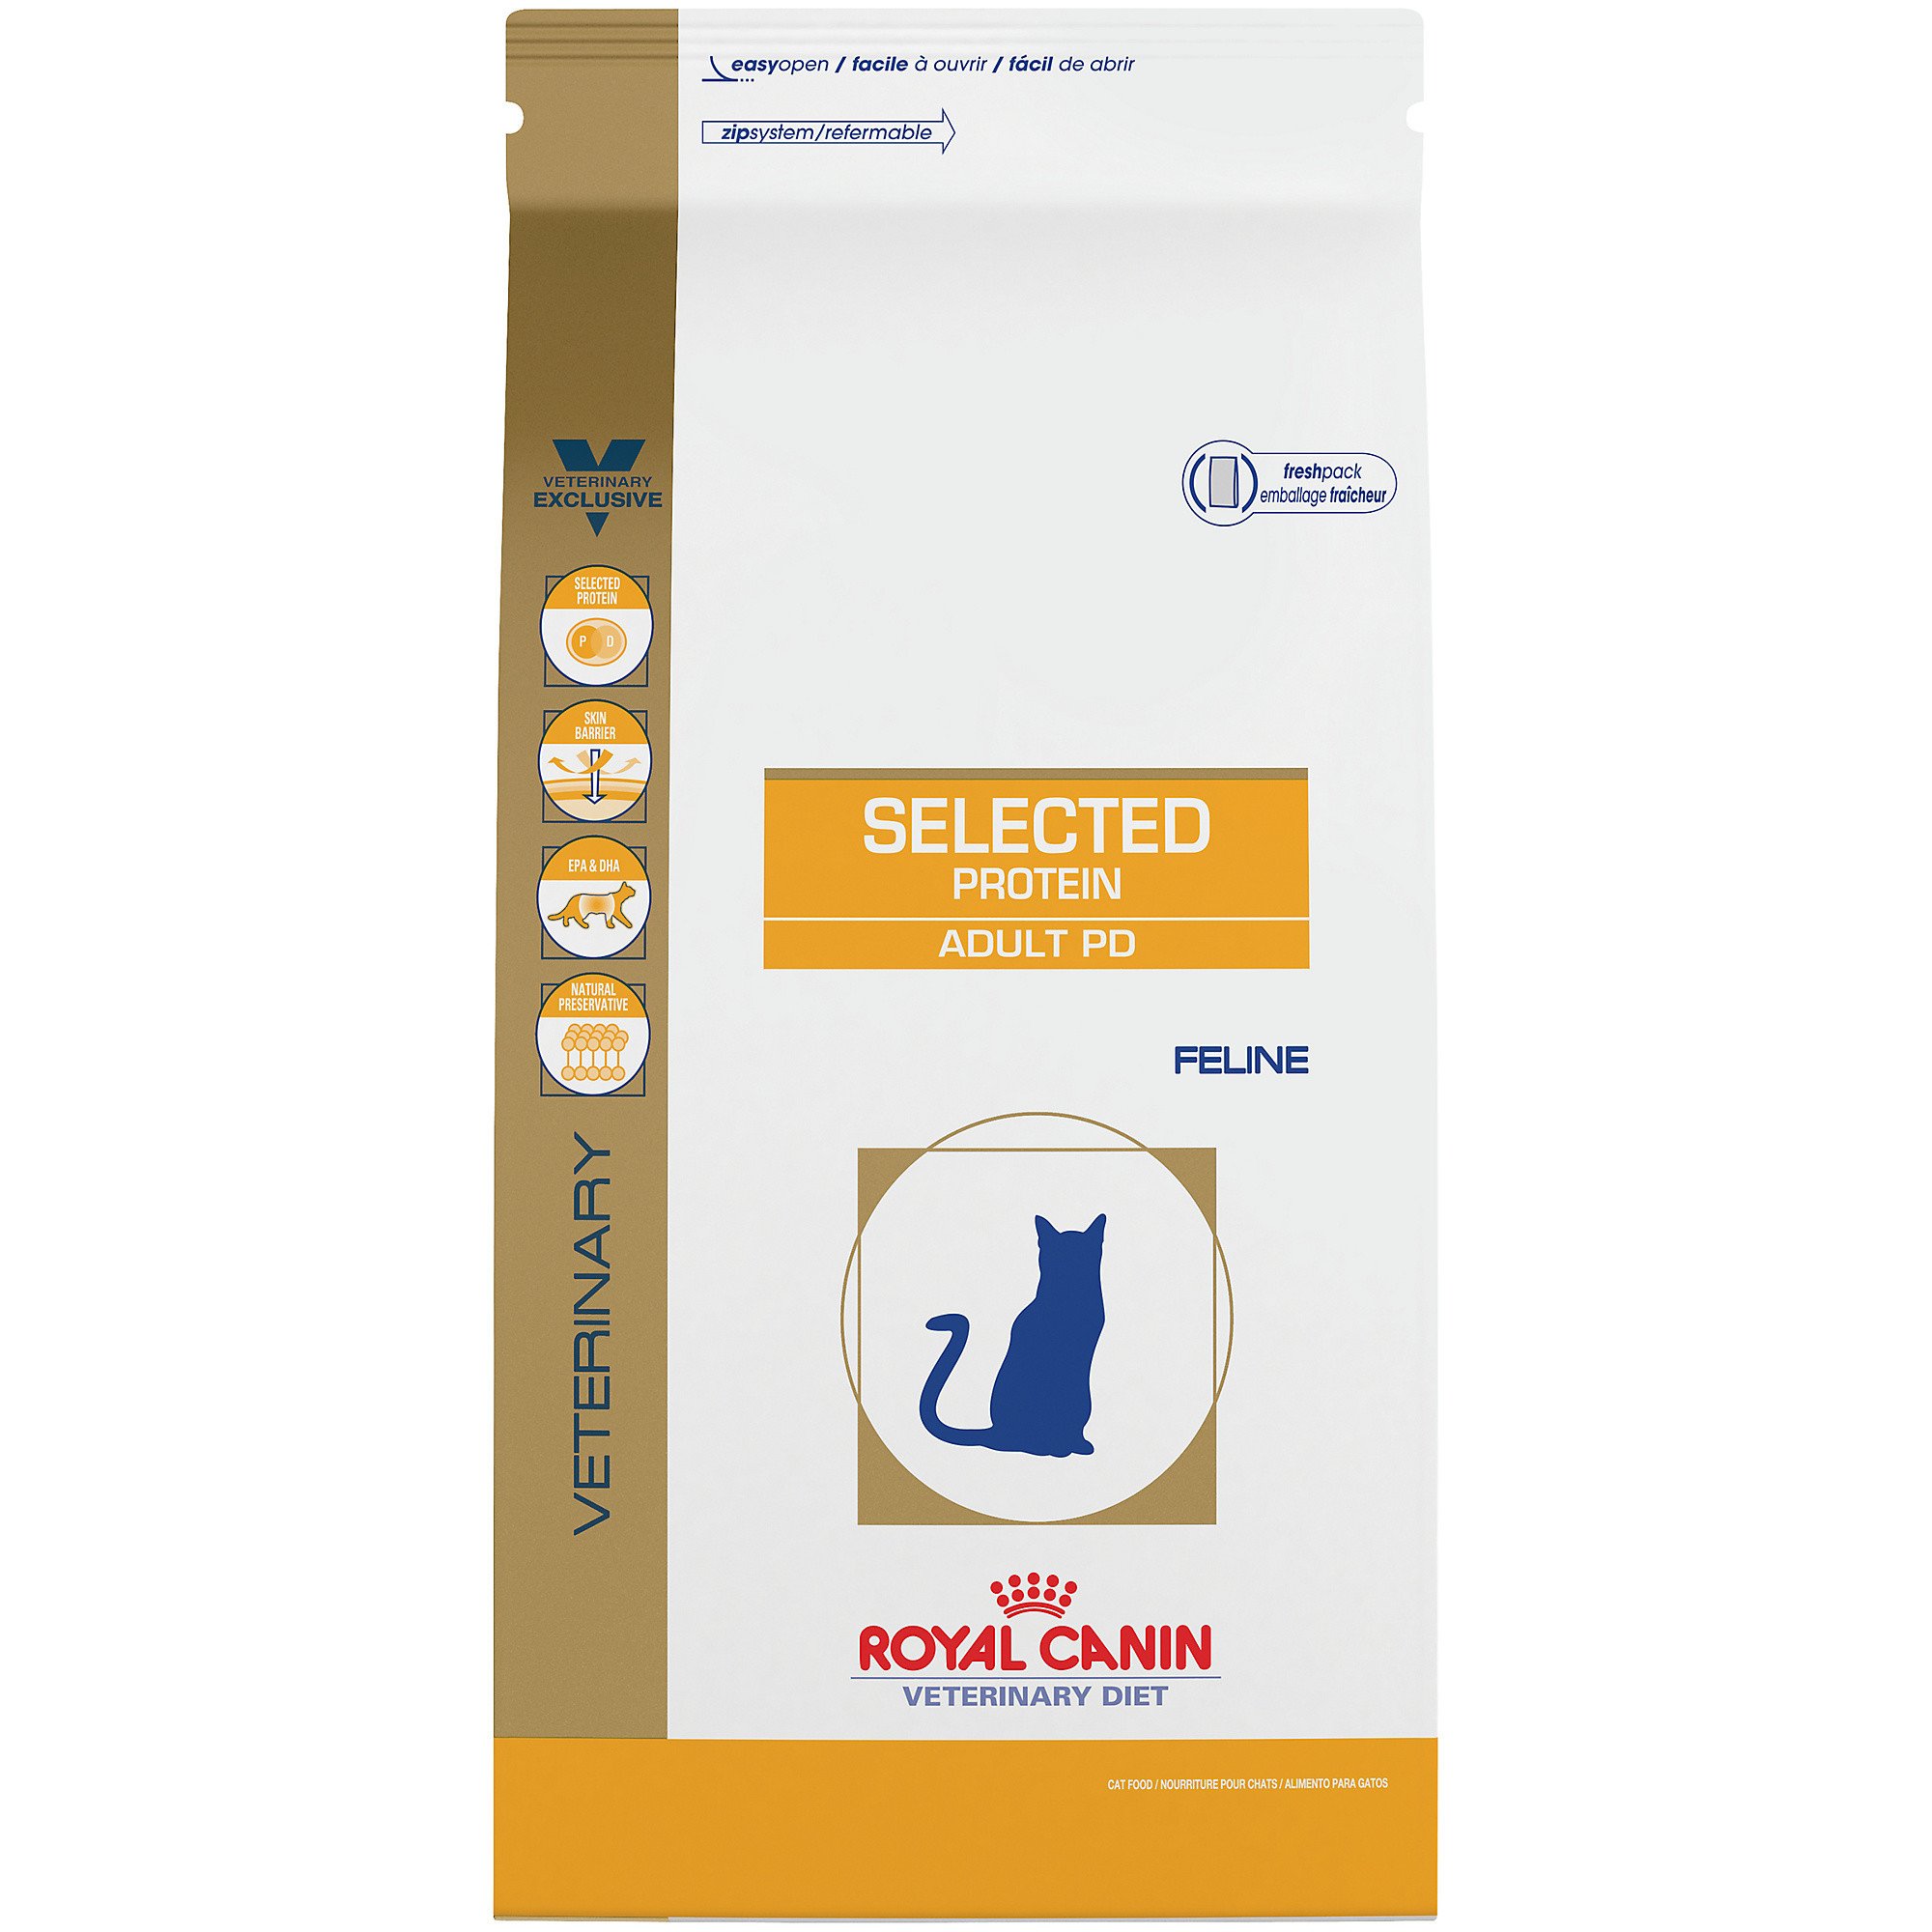 royal canin selected protein cat food